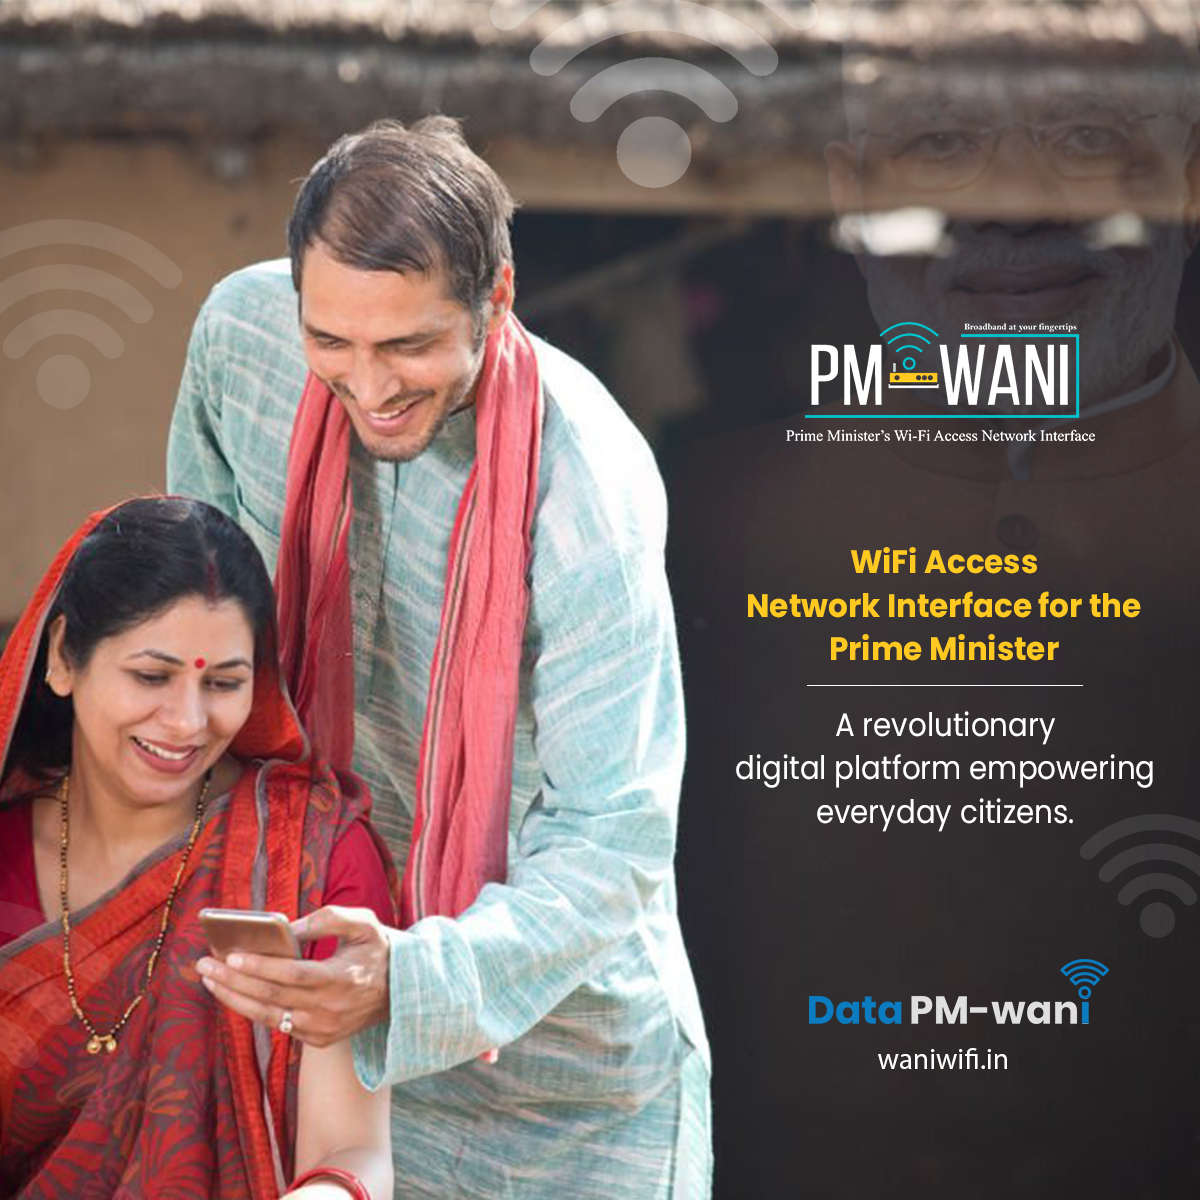 Experience the power of a revolutionary digital platform that empowers everyday citizens. Stay connected, informed, & engaged like never before!
Visit us at waniwifi.in

#WiFiAccessNetworkInterface #DigitalEmpowerment #EngageAndEmpower #datapmwani #pmwani #waniwifi